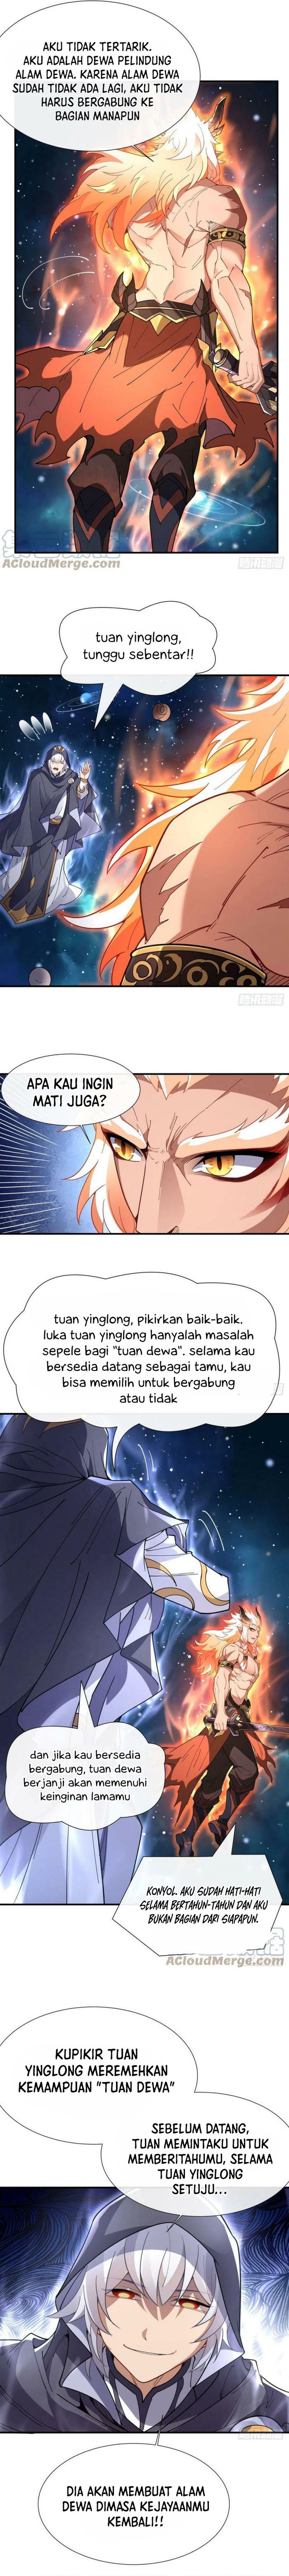 Dilarang COPAS - situs resmi www.mangacanblog.com - Komik my female apprentices are all big shots from the future 142 - chapter 142 143 Indonesia my female apprentices are all big shots from the future 142 - chapter 142 Terbaru 5|Baca Manga Komik Indonesia|Mangacan